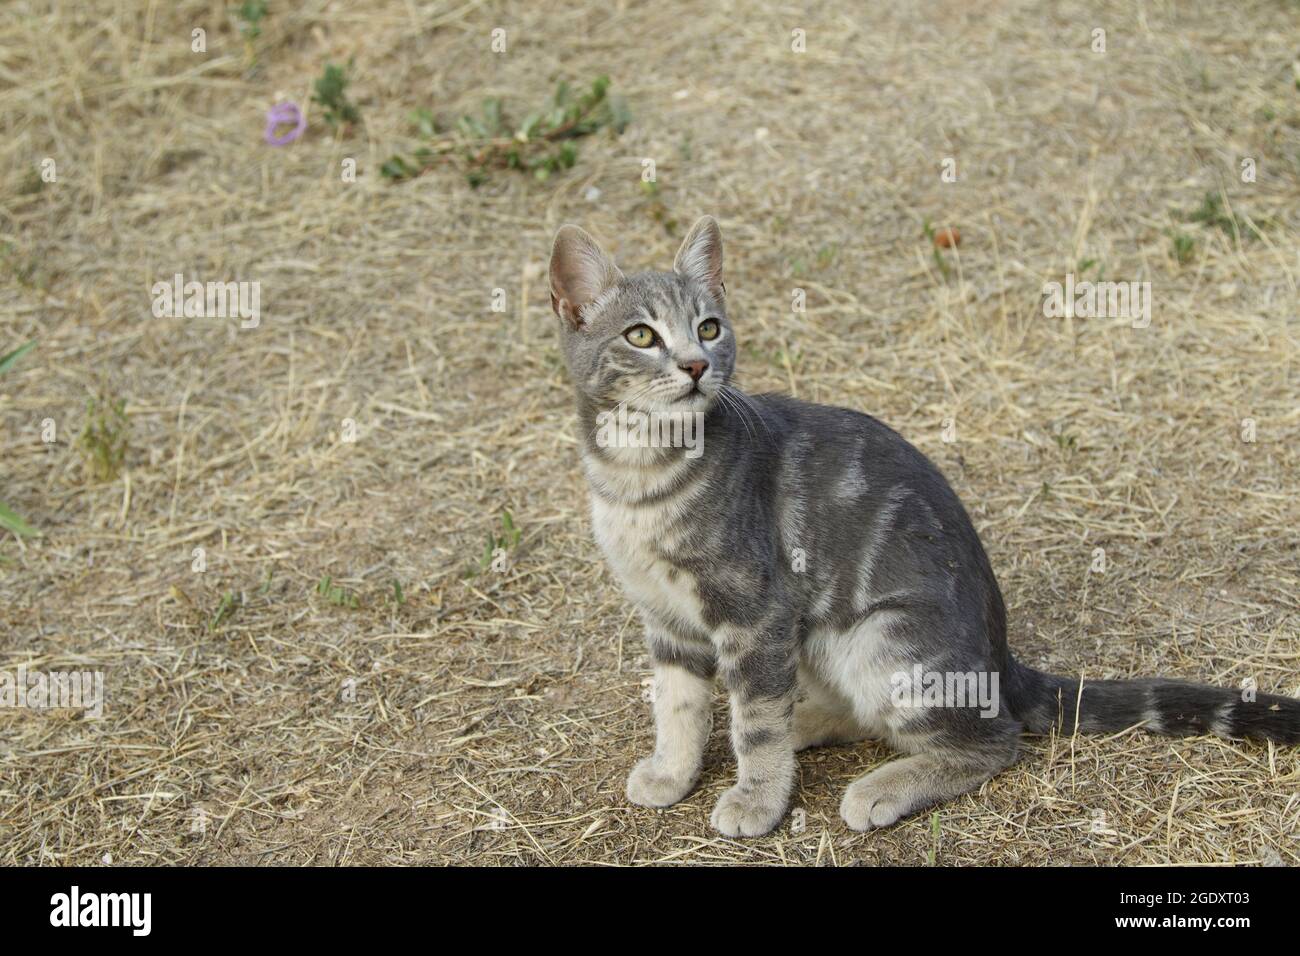 Cute baby cat playing in the garden Stock Photo